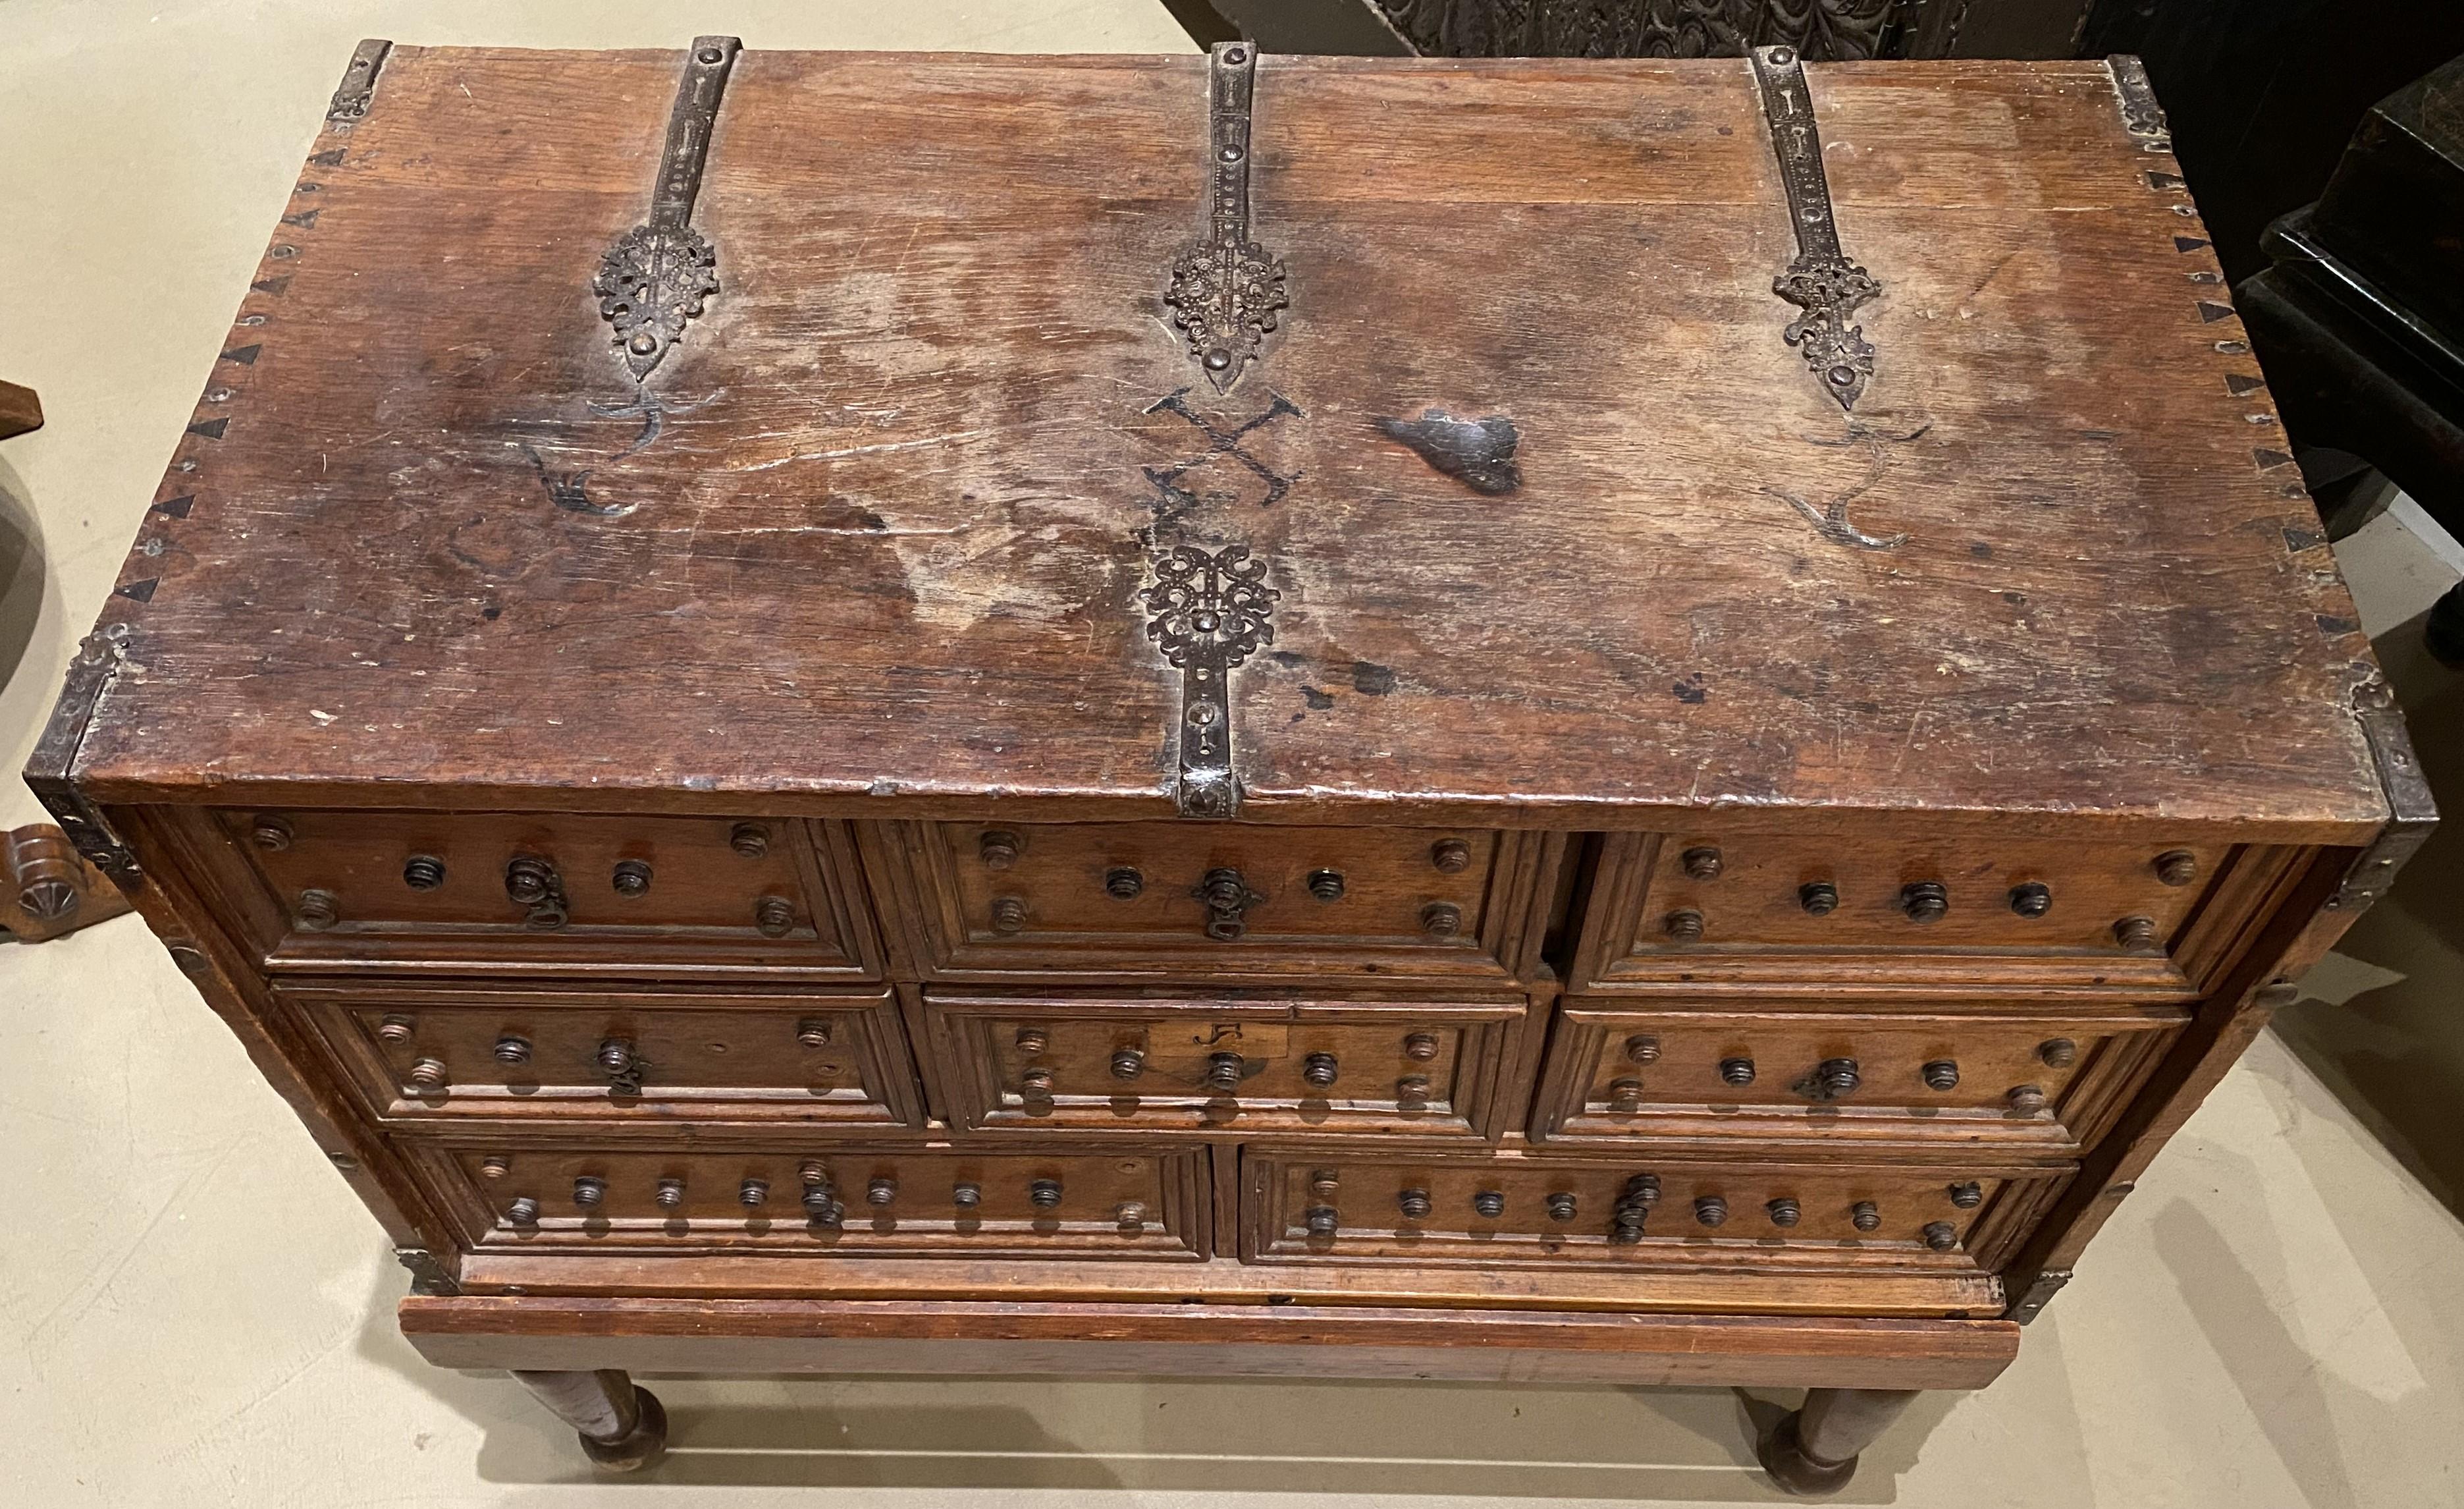 A fine example of a Spanish Baroque iron mounted oak vargueno or collector cabinet with eight drawers, beautifully detailed iron support straps and carvings on the top, forged iron handles, interesting wooden knob decoration on each drawer front,